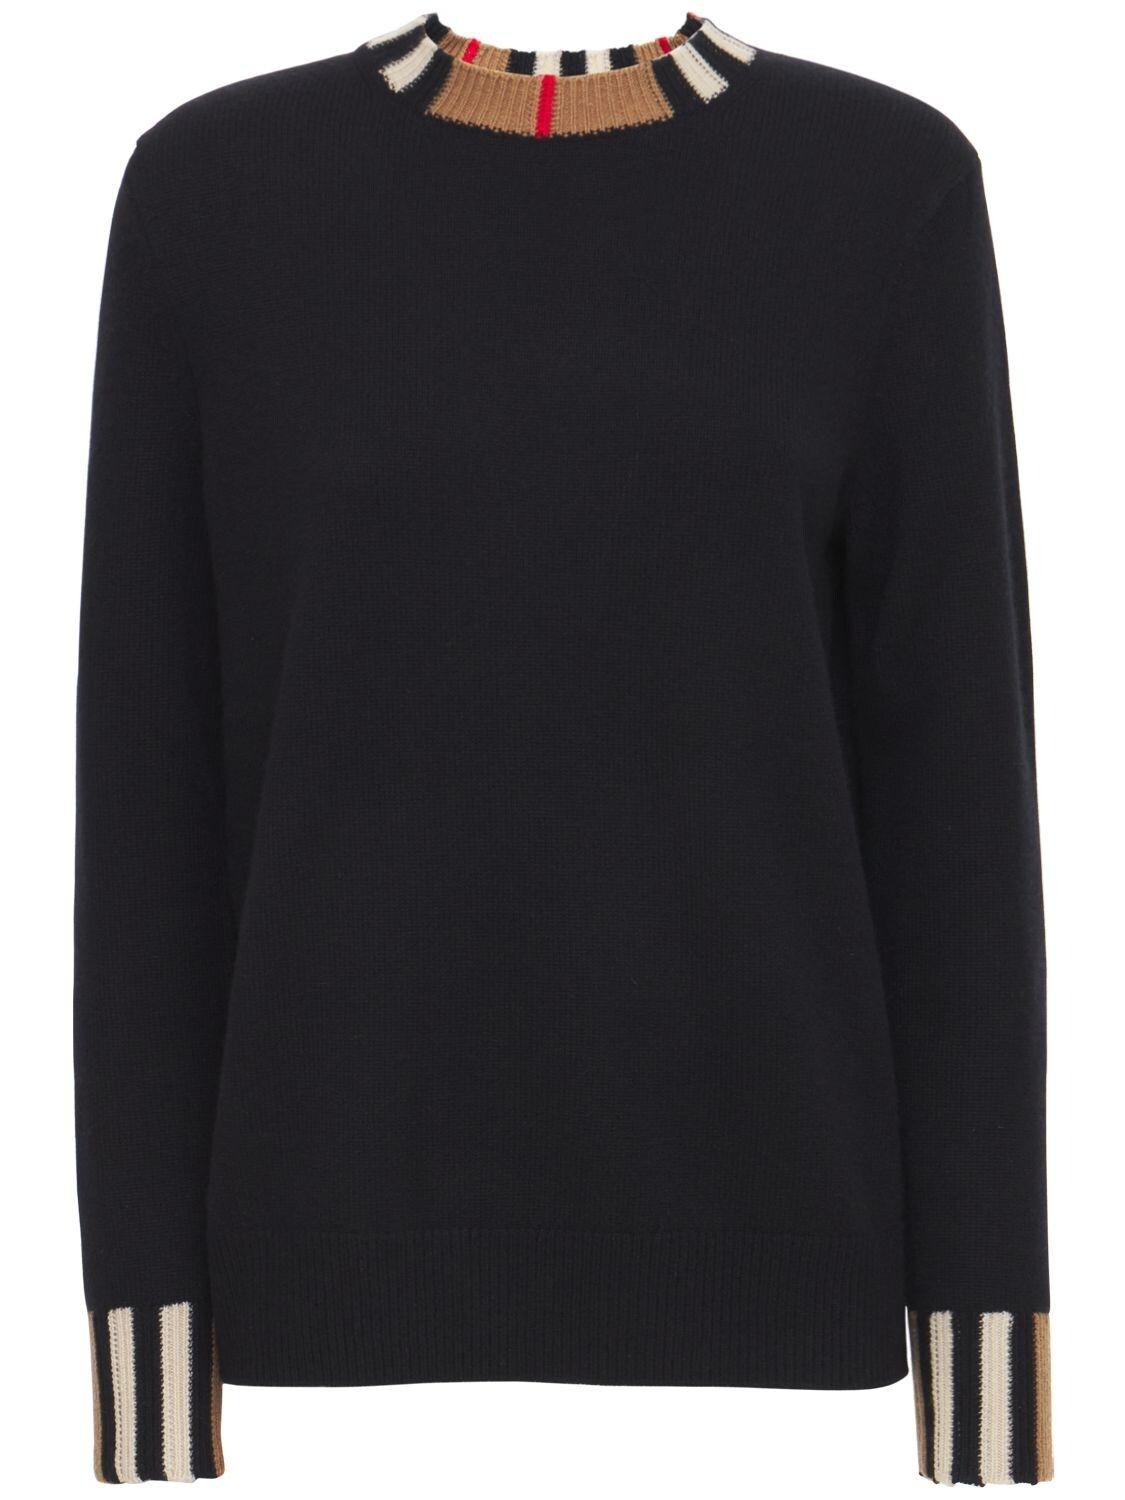 Burberry Eyre Cashmere Knit Sweater in Black | Lyst